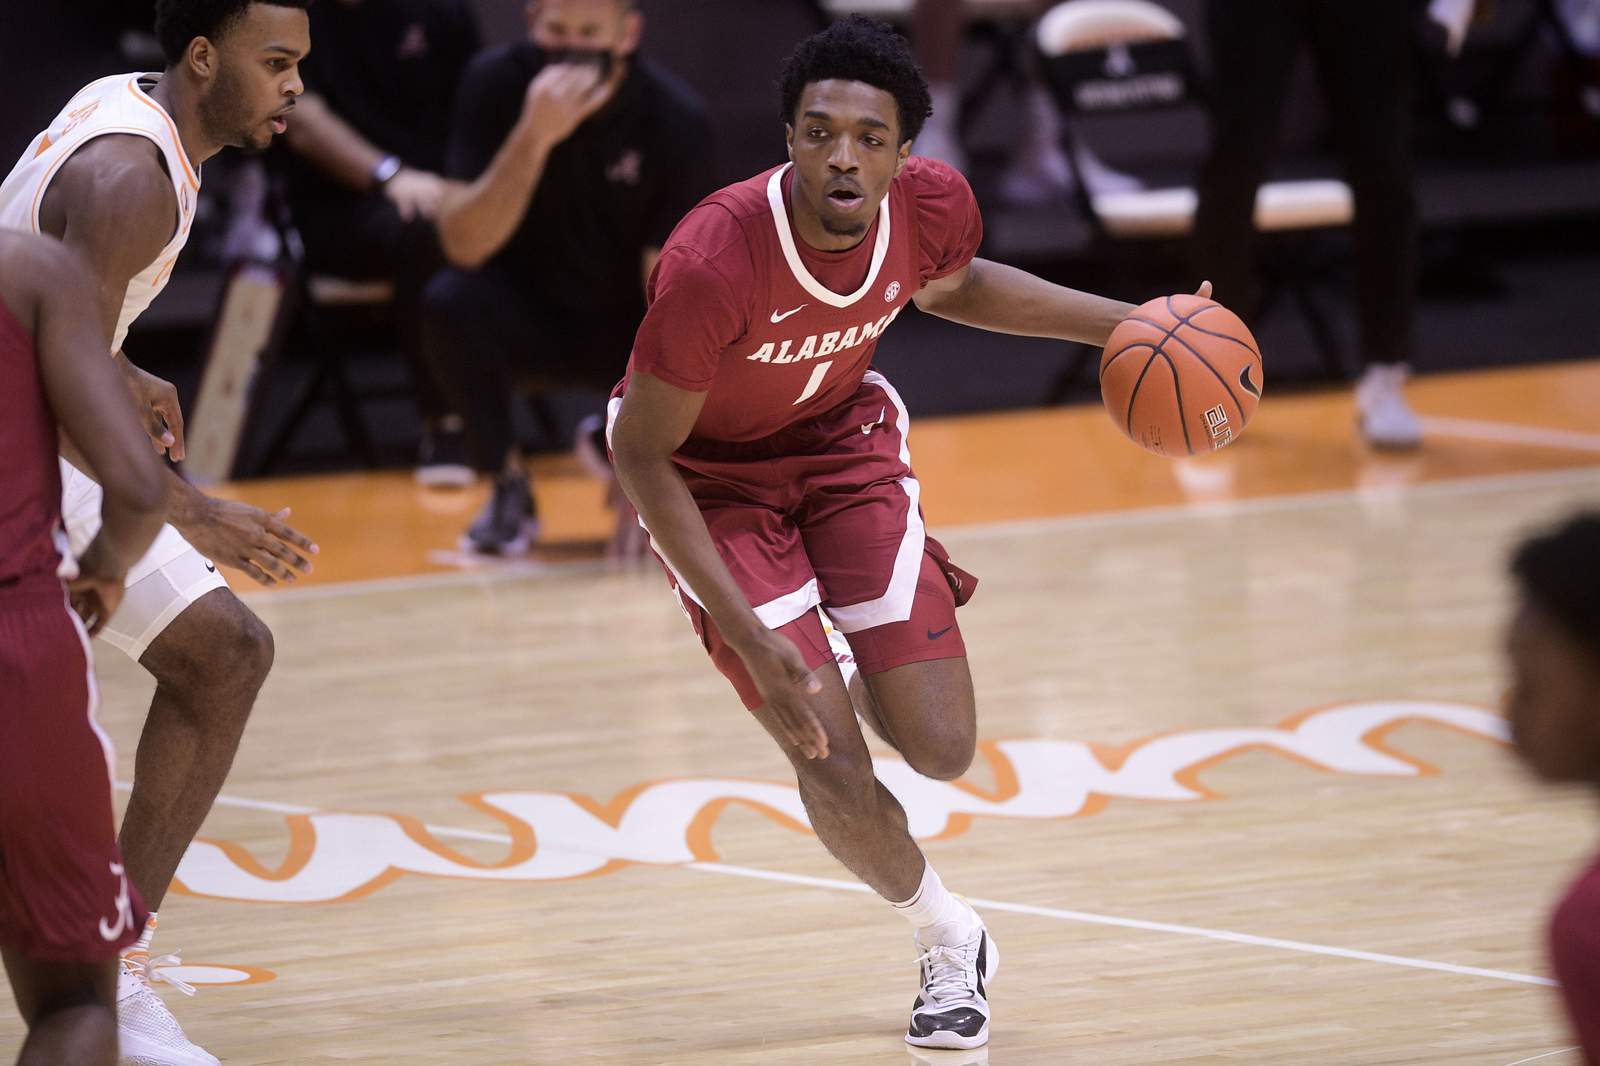 Alabama stuns No. 7 Tennessee 71-63 in physical battle